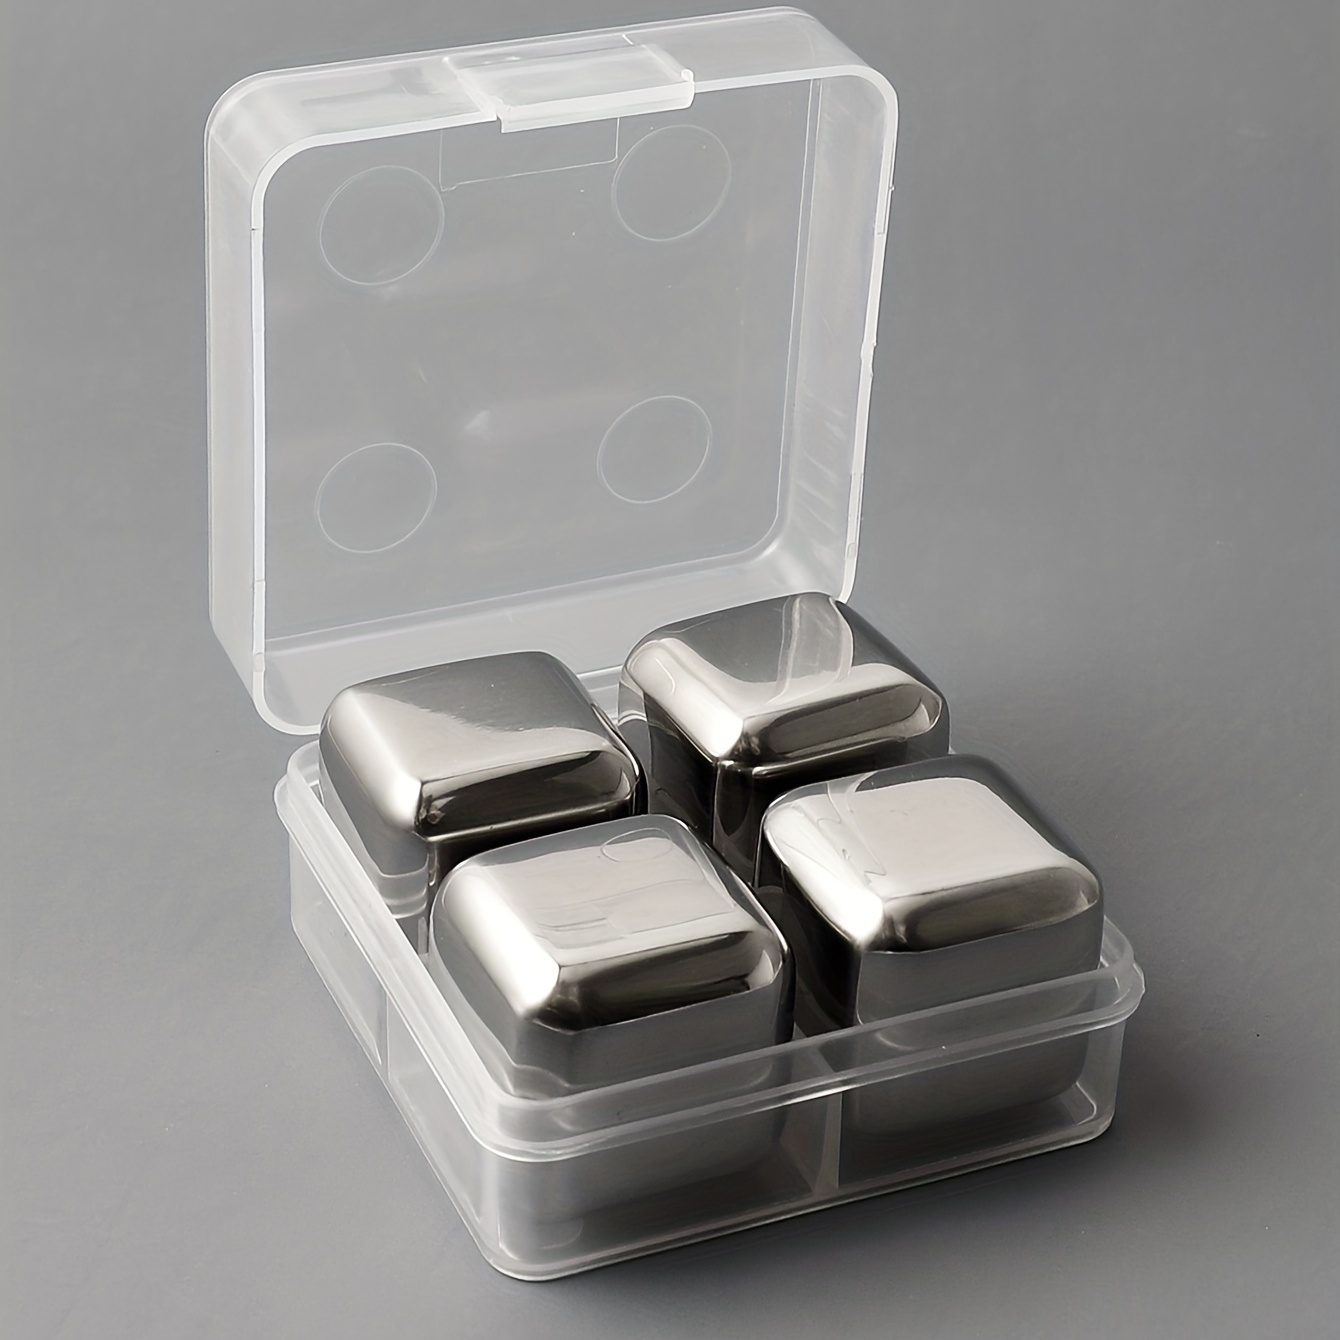 Stainless Steel Reusable Ice Cubes Chilling Stones Cooling Cube